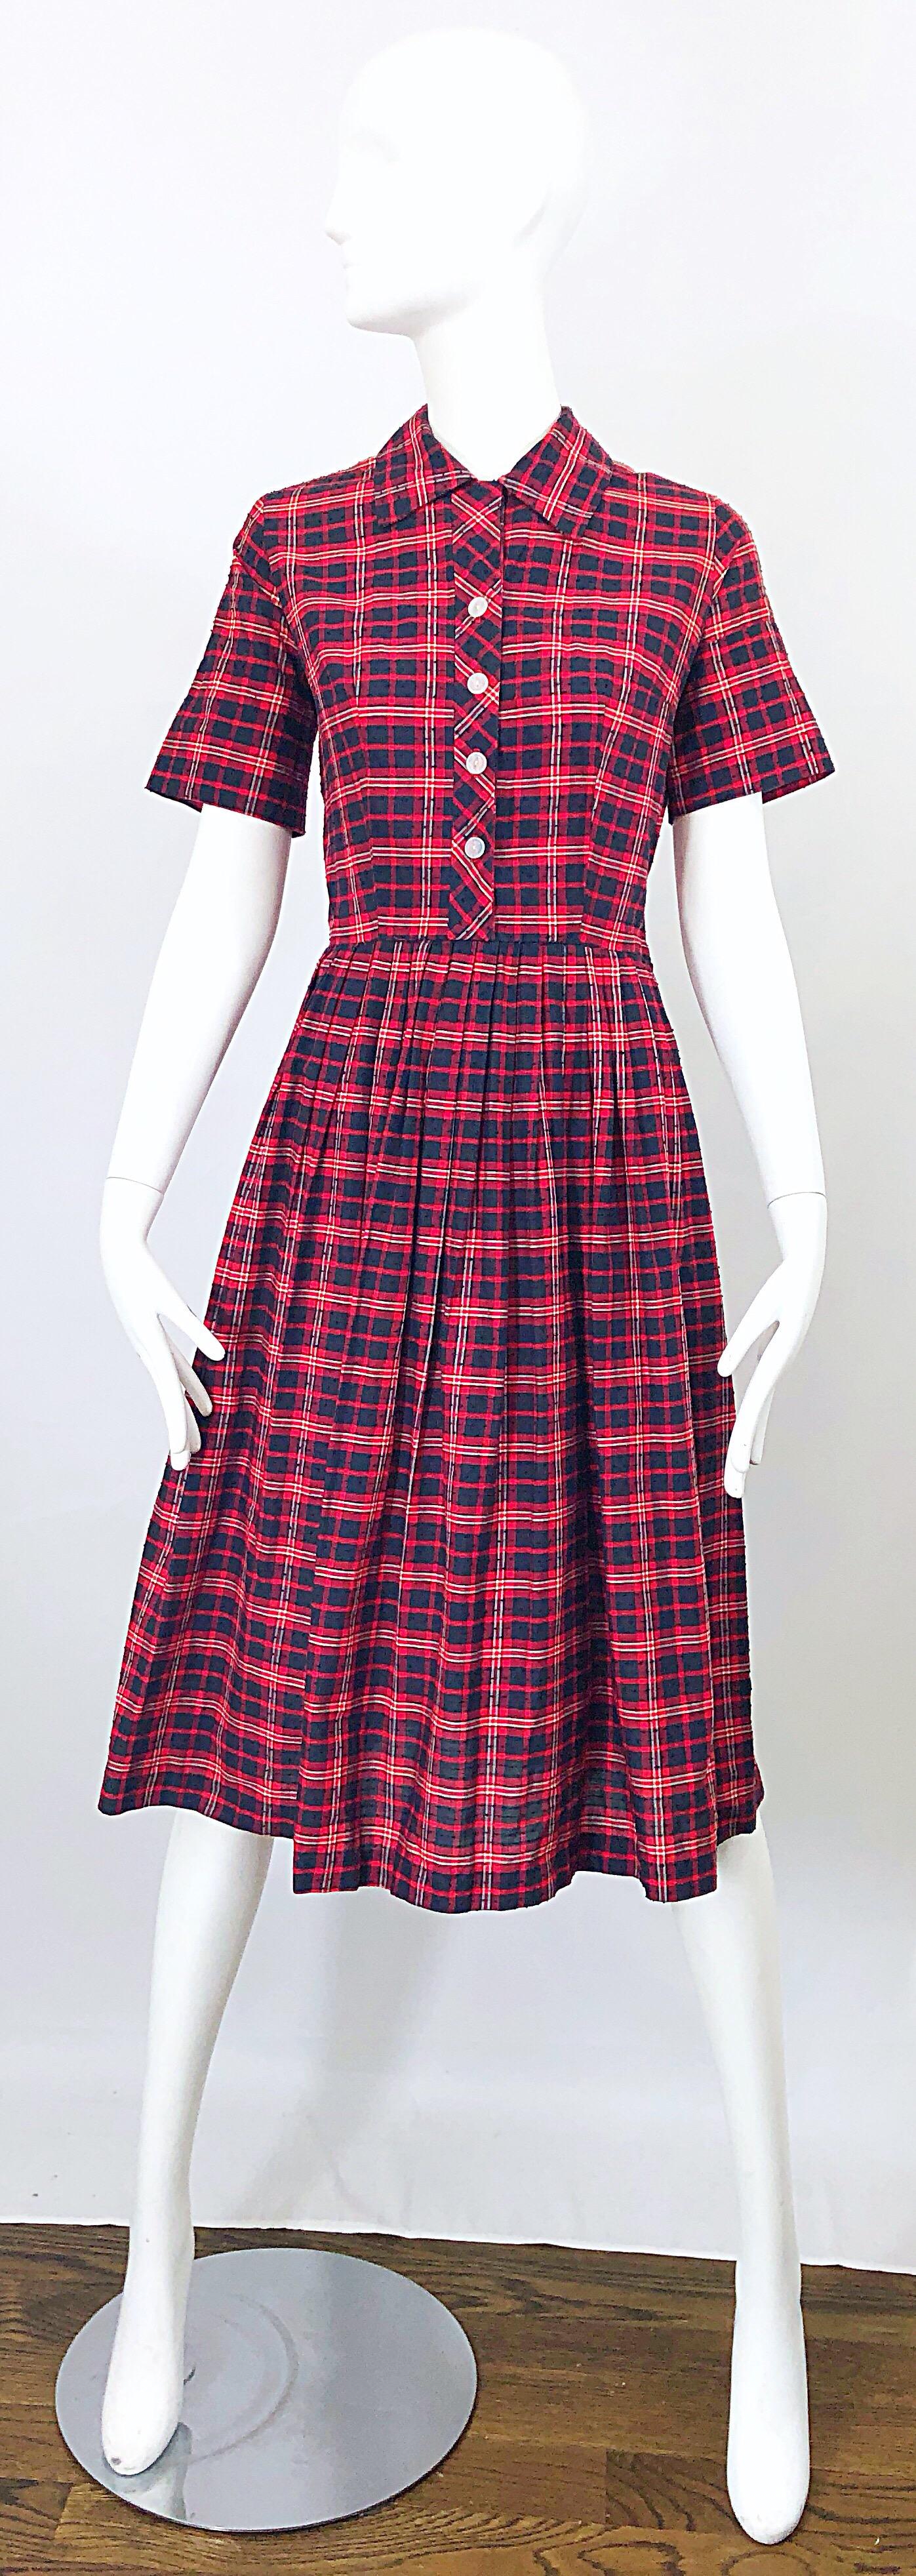 Awesome 50 KERRYBROOKE red, white and blue plaid fit n'flare shirt dress! When I first discovered this dress, I thought the back was the front, until I saw the actual front. Cotton blend fabric tag reads, 